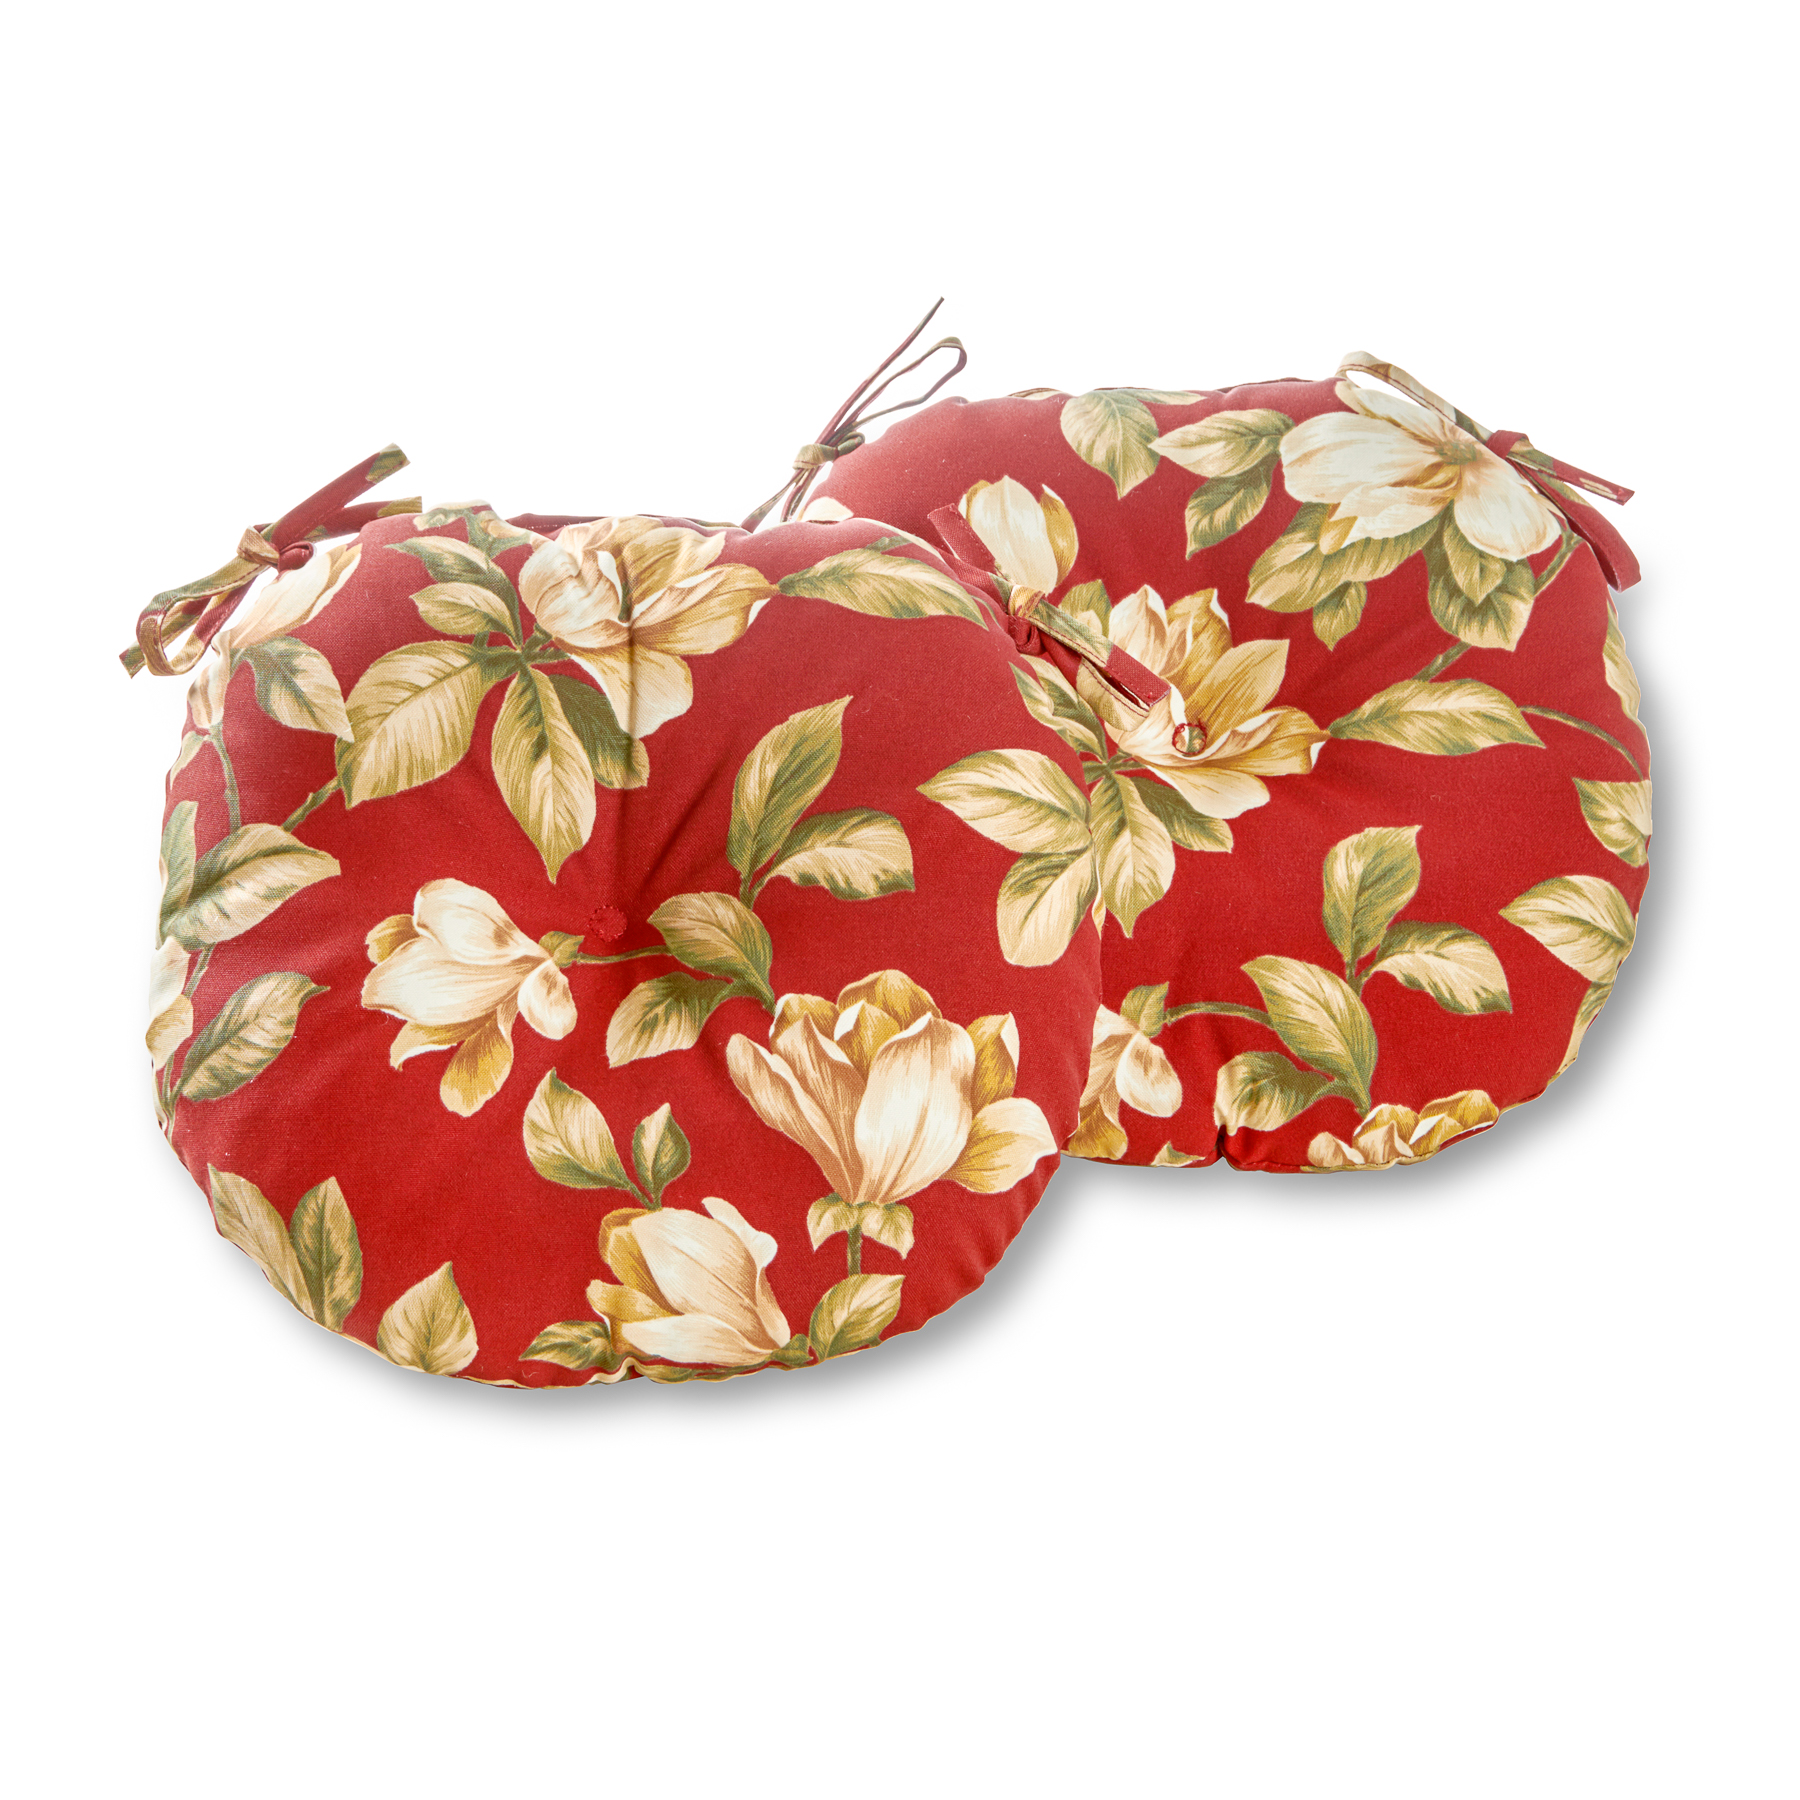 Greendale Home Fashions Roma Floral 15 in. Round Outdoor Reversible Bistro Seat Cushion (Set of 2) - image 1 of 7